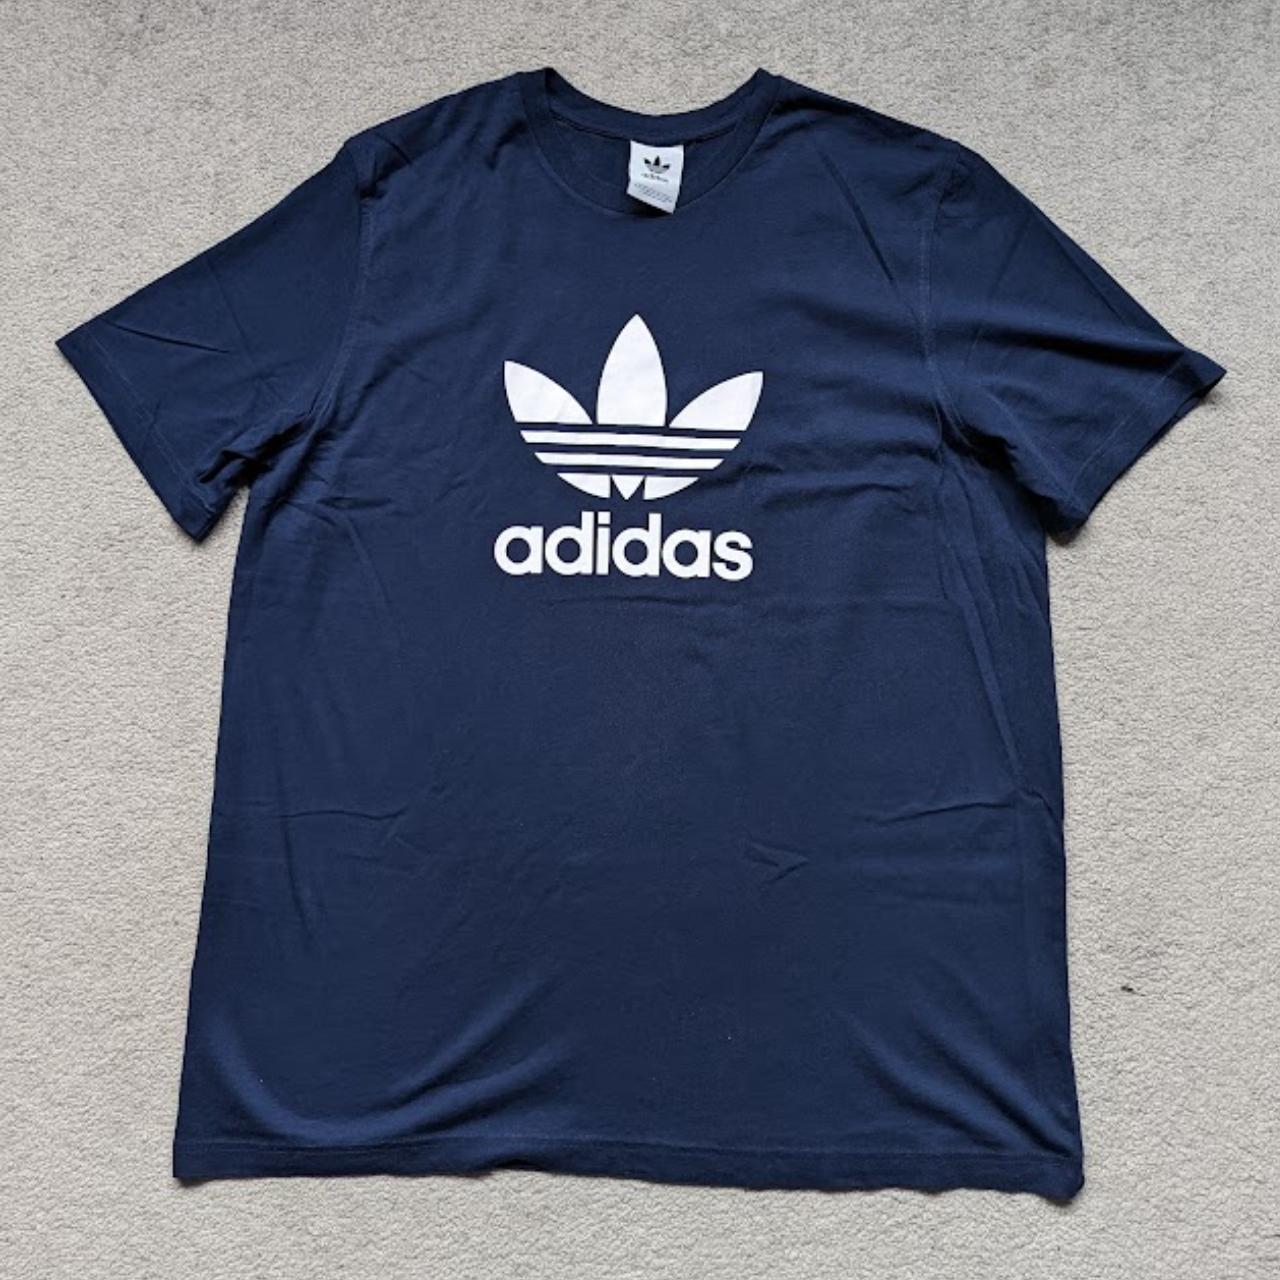 For Sale, Adidas Trefolio T Shirt. Note: There is... - Depop